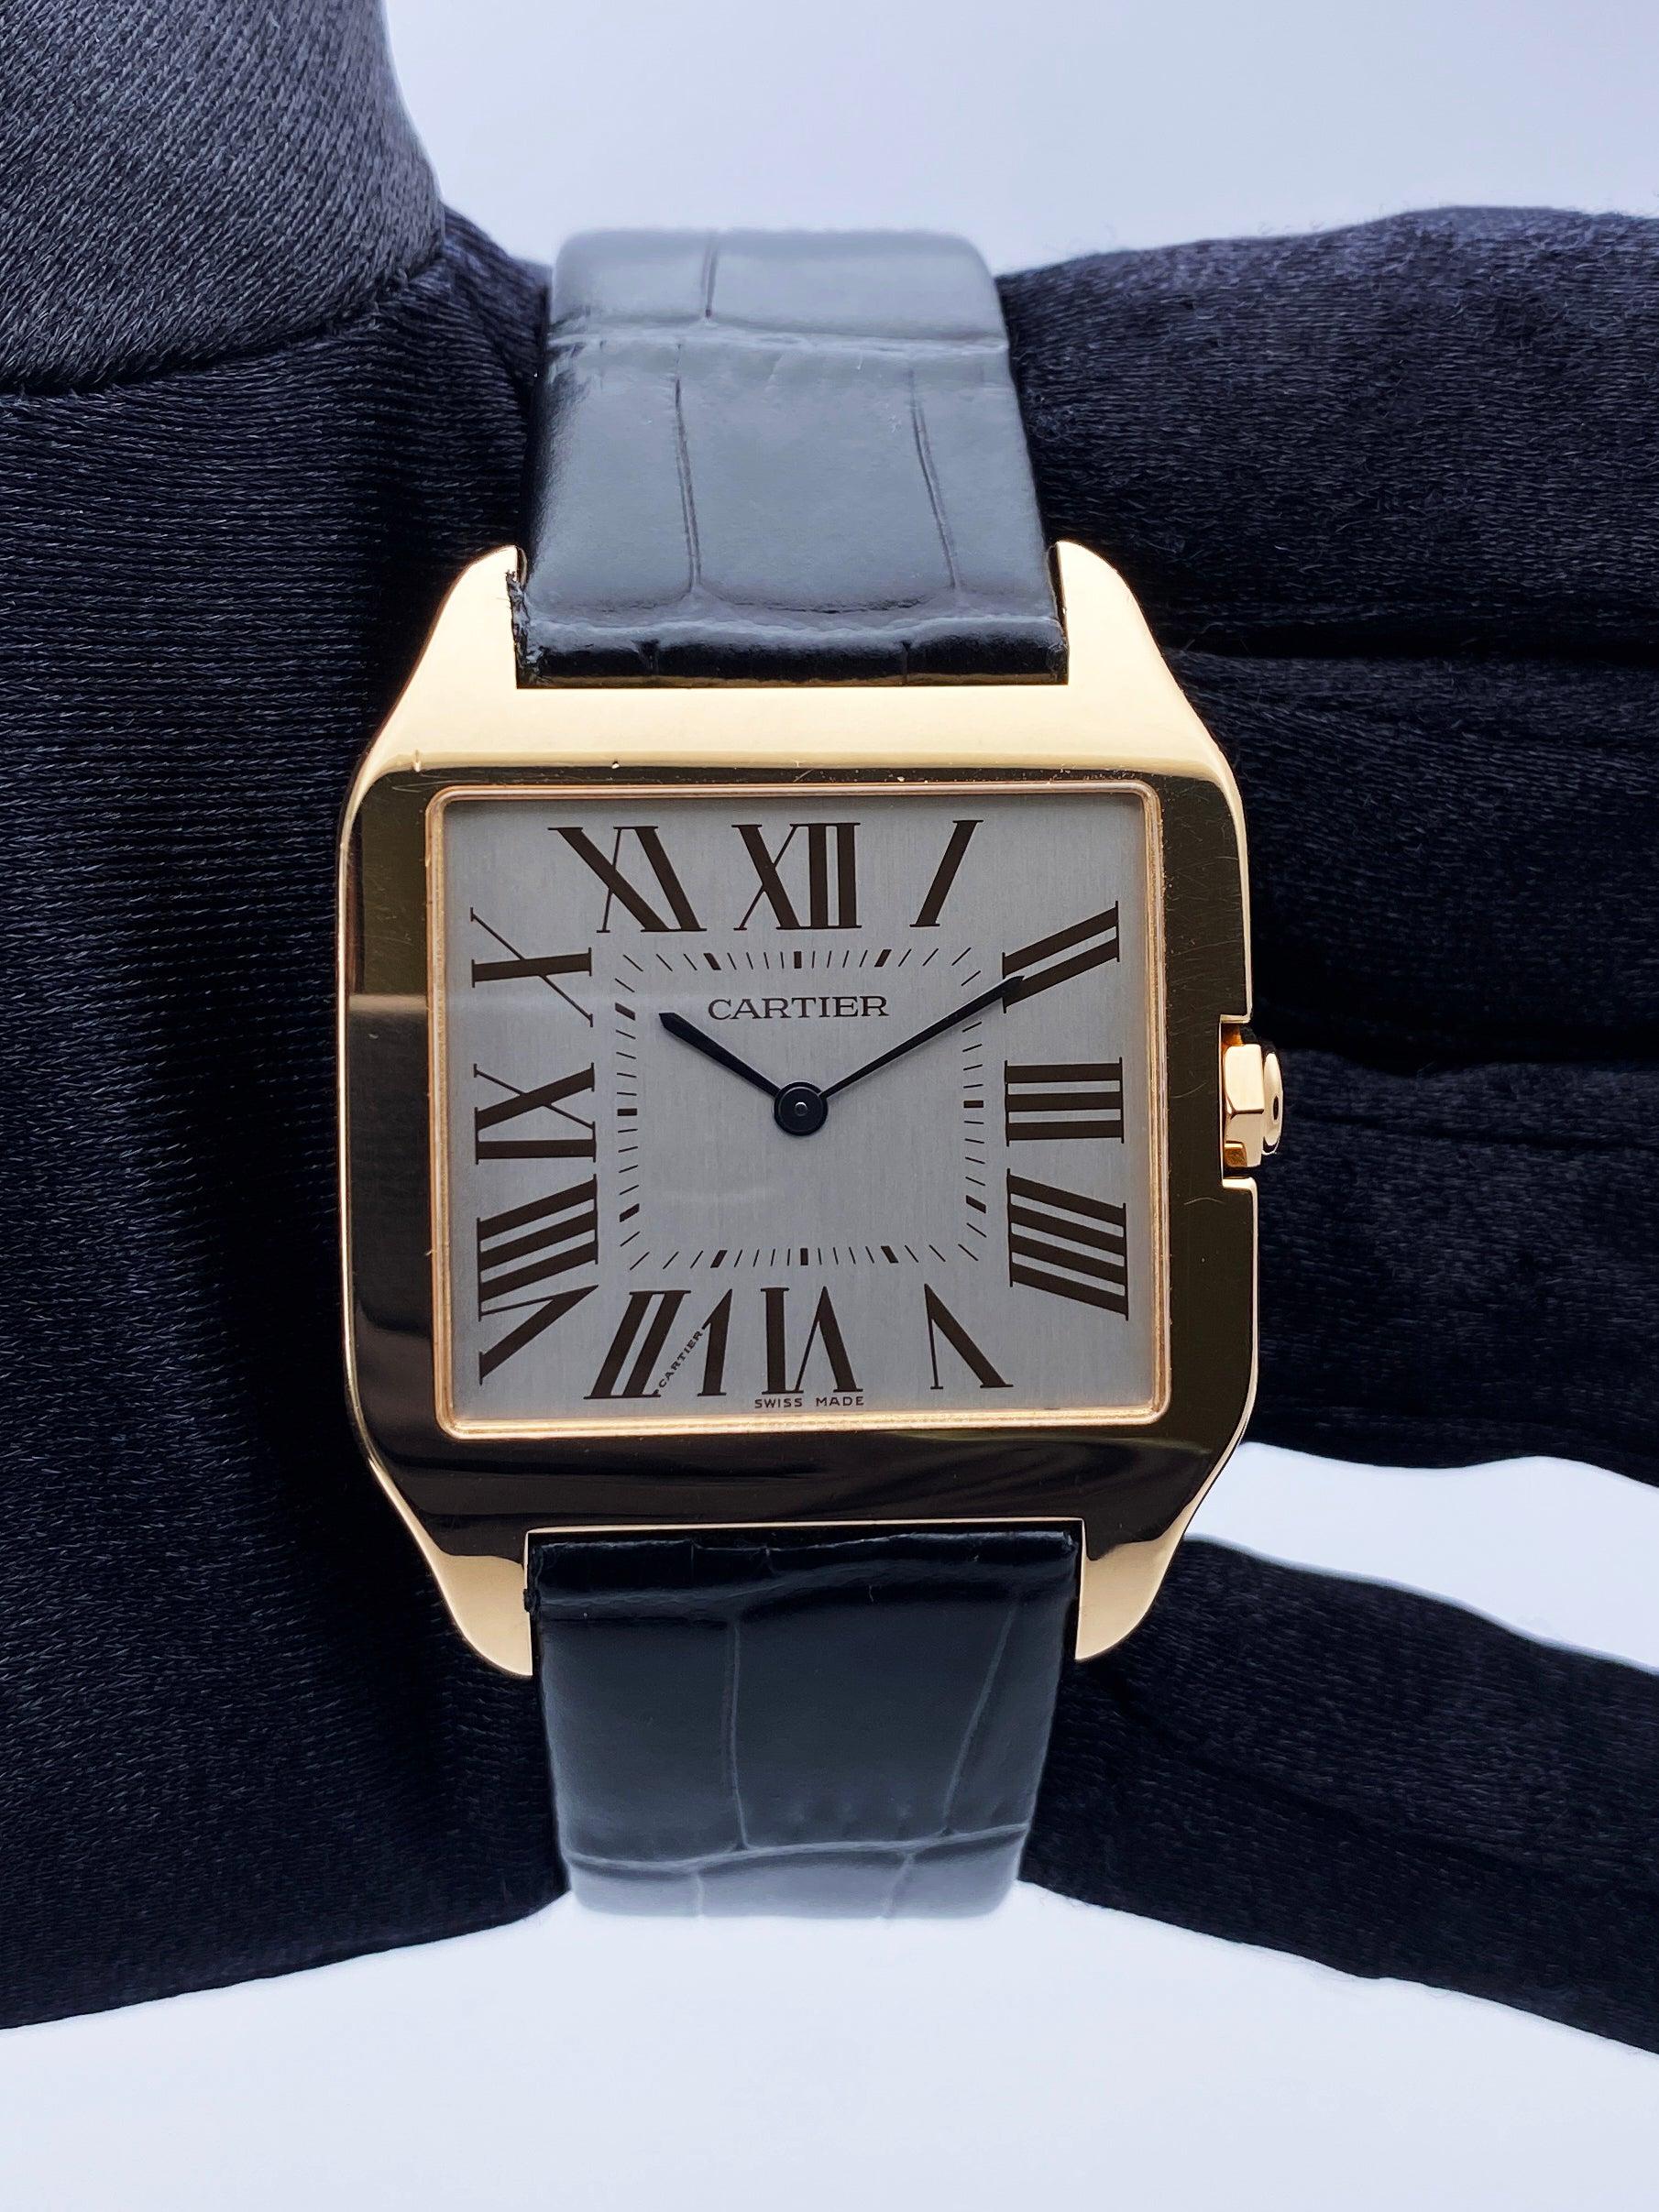 Cartier Santos Dumont W2006951 Ladies Watch. 35mm 18K rose gold case. Grey satin-brushed dial with black hands and black Roman numeral hour marker. Minute markers on the inner dial. black leather strap with 18K rose gold deployant clasp. Will fit up